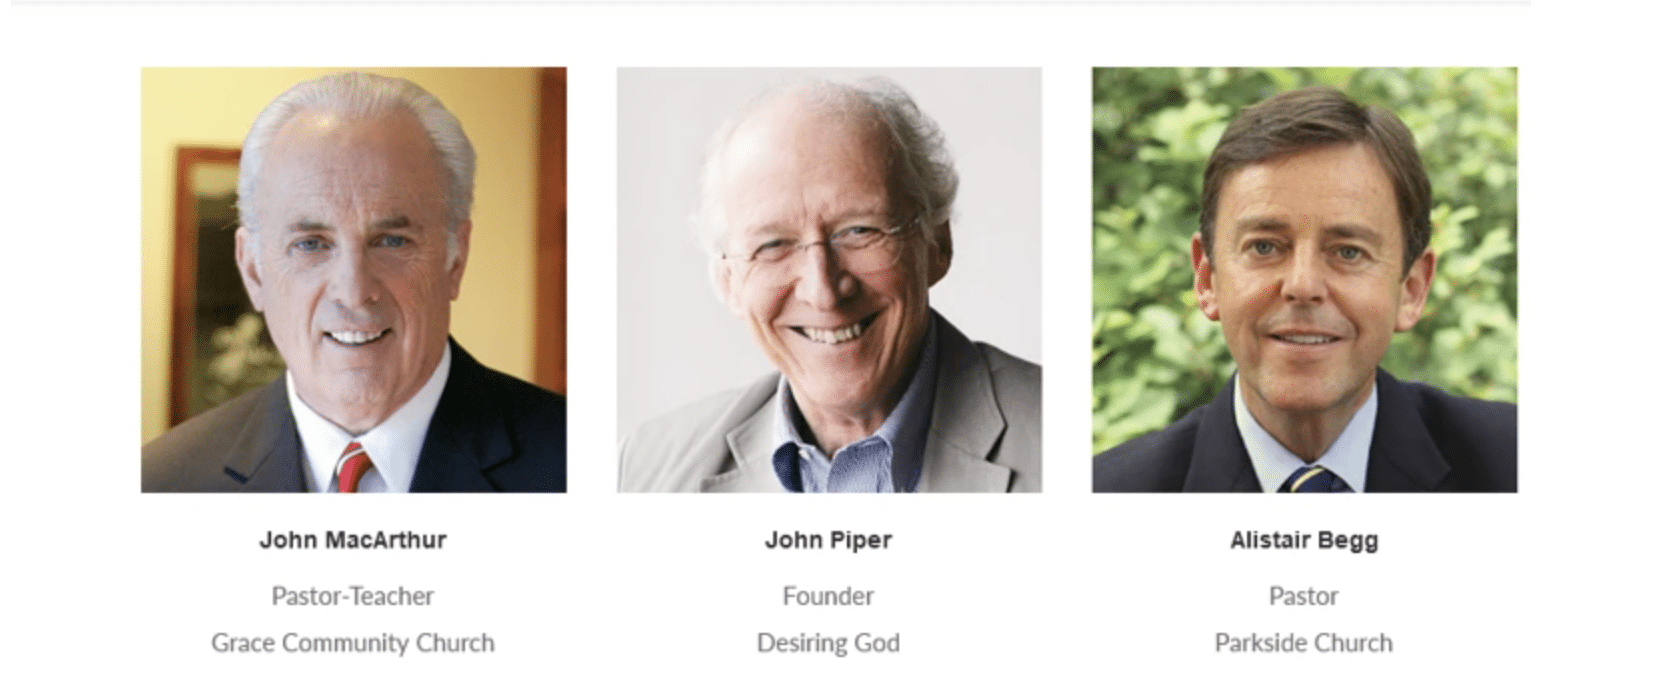 John MacArthur’s “Shepherd’s Conference” removes Alistair Begg from speakers’ lineup